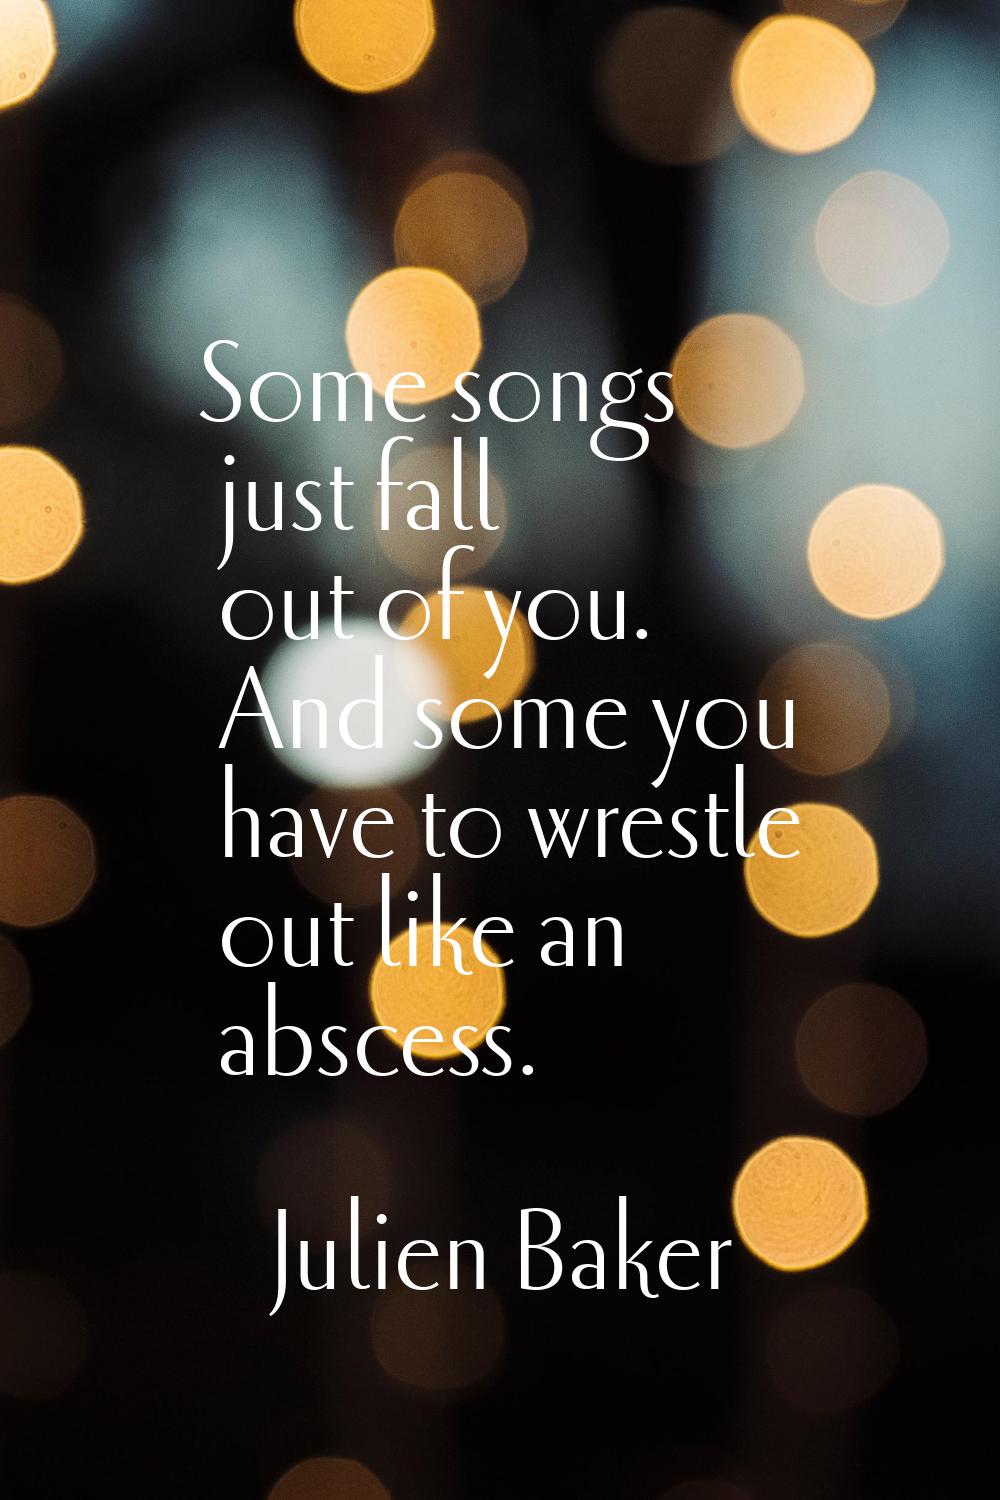 Some songs just fall out of you. And some you have to wrestle out like an abscess.